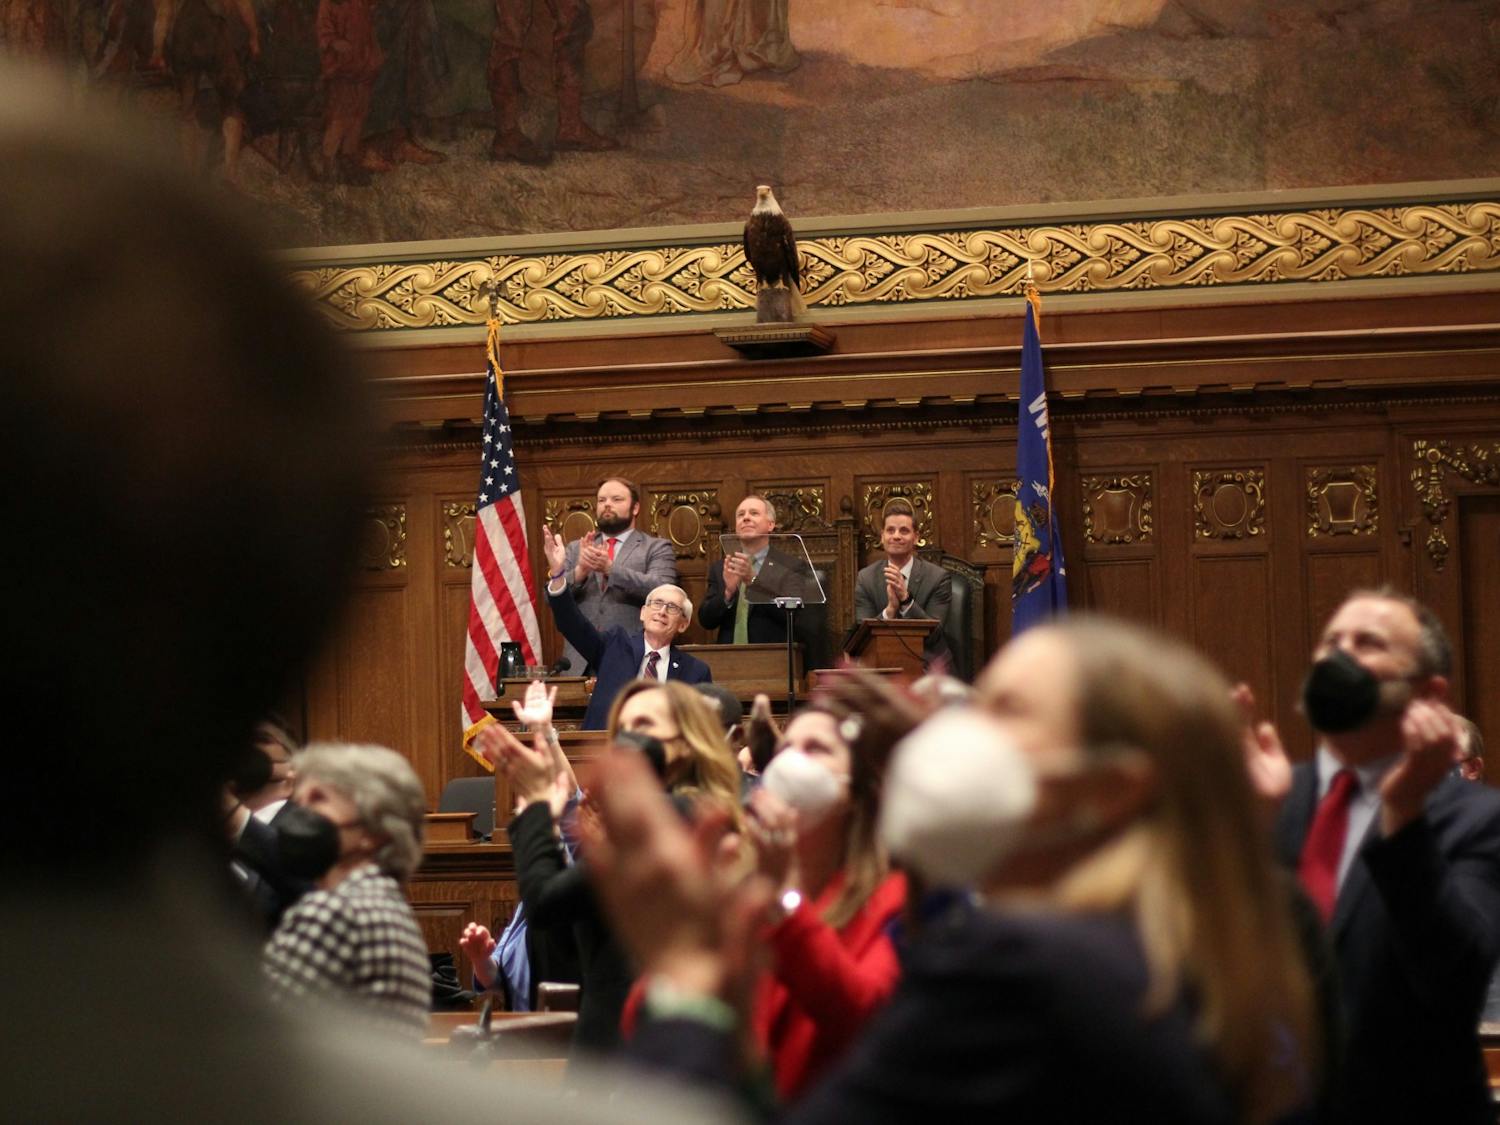 PHOTOS: Gov. Tony Evers delivers the 2022 Wisconsin State of the State address